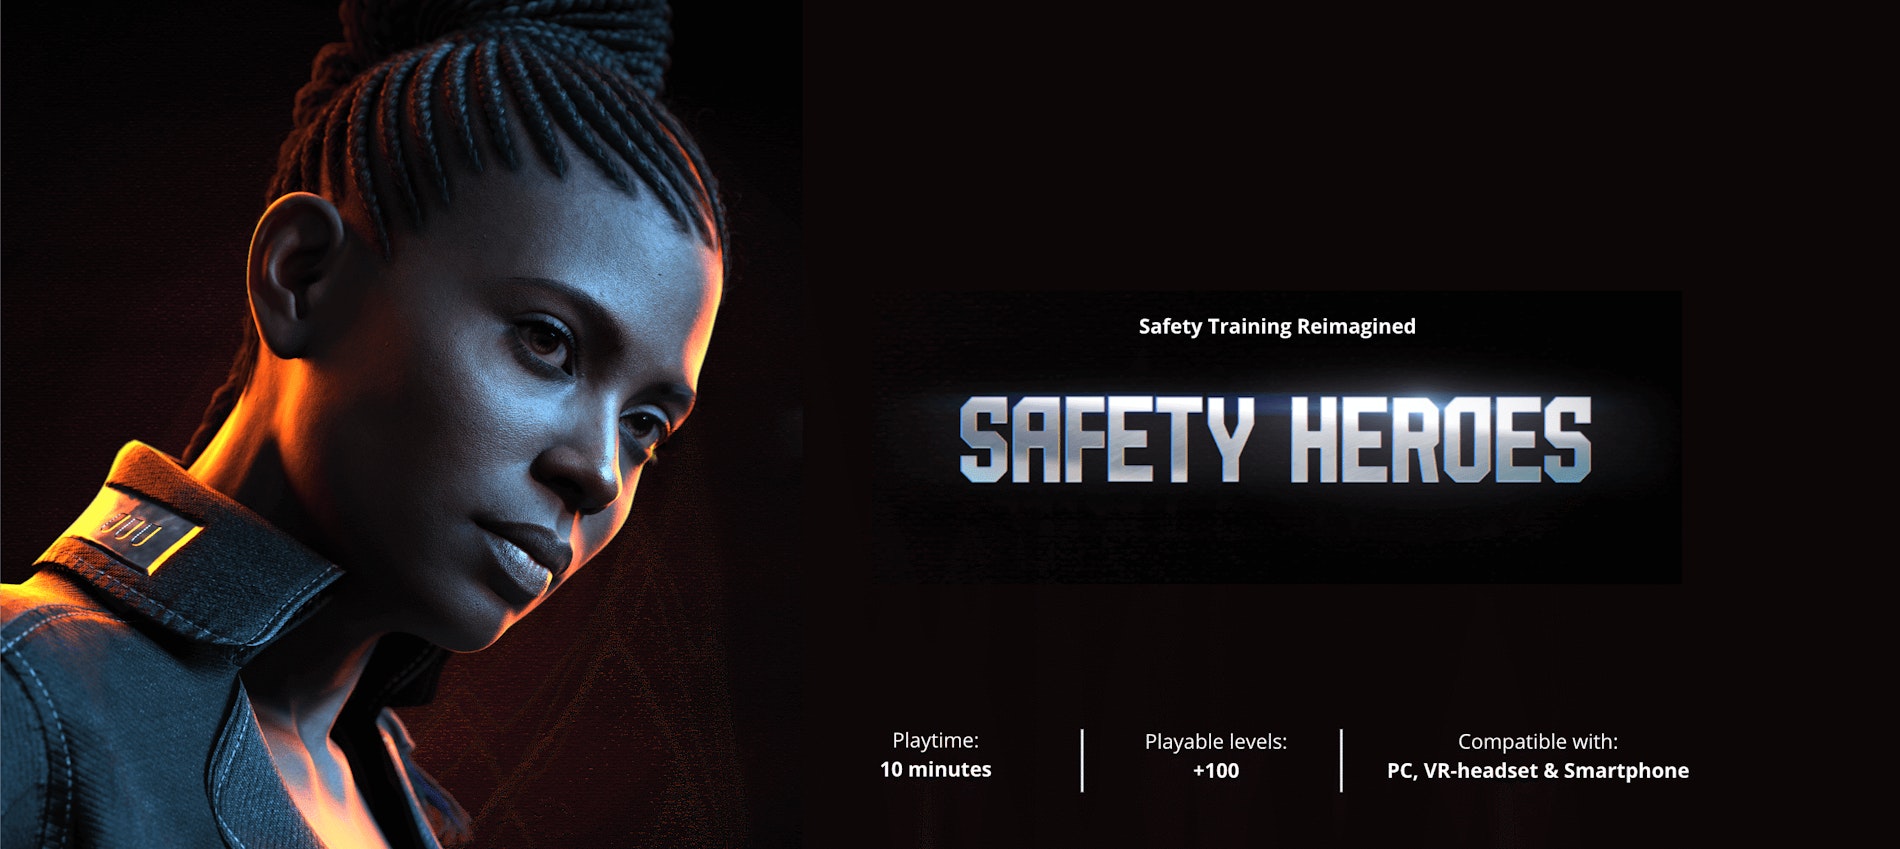 Safety heroes title